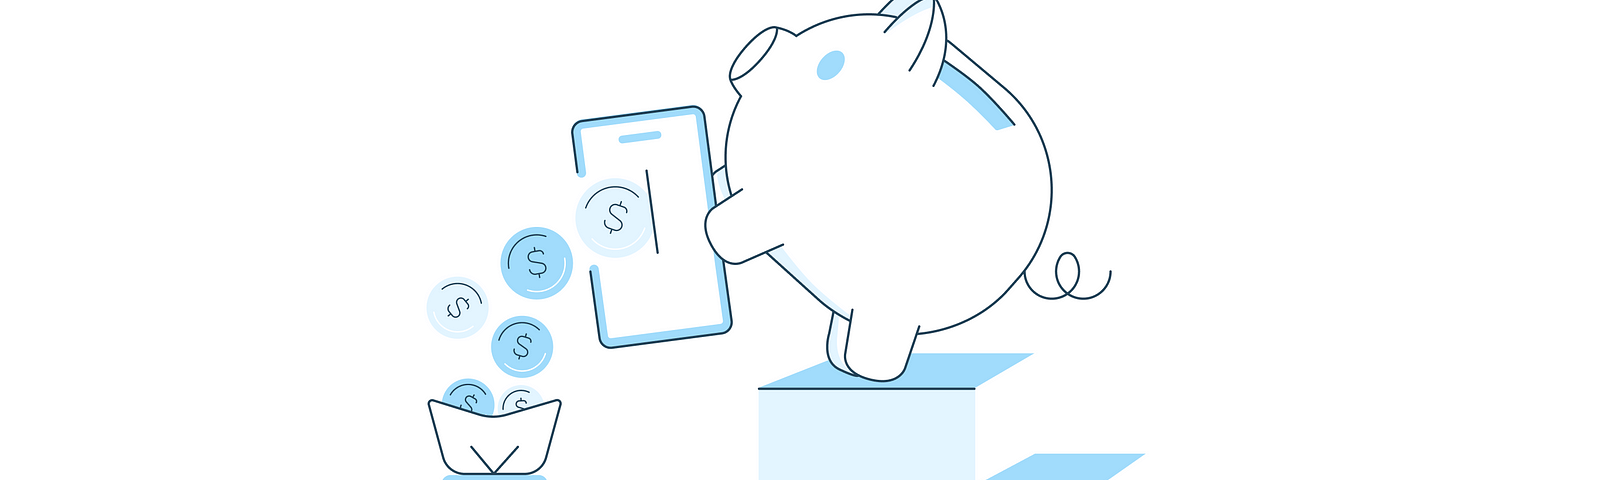 In-app payments illustration